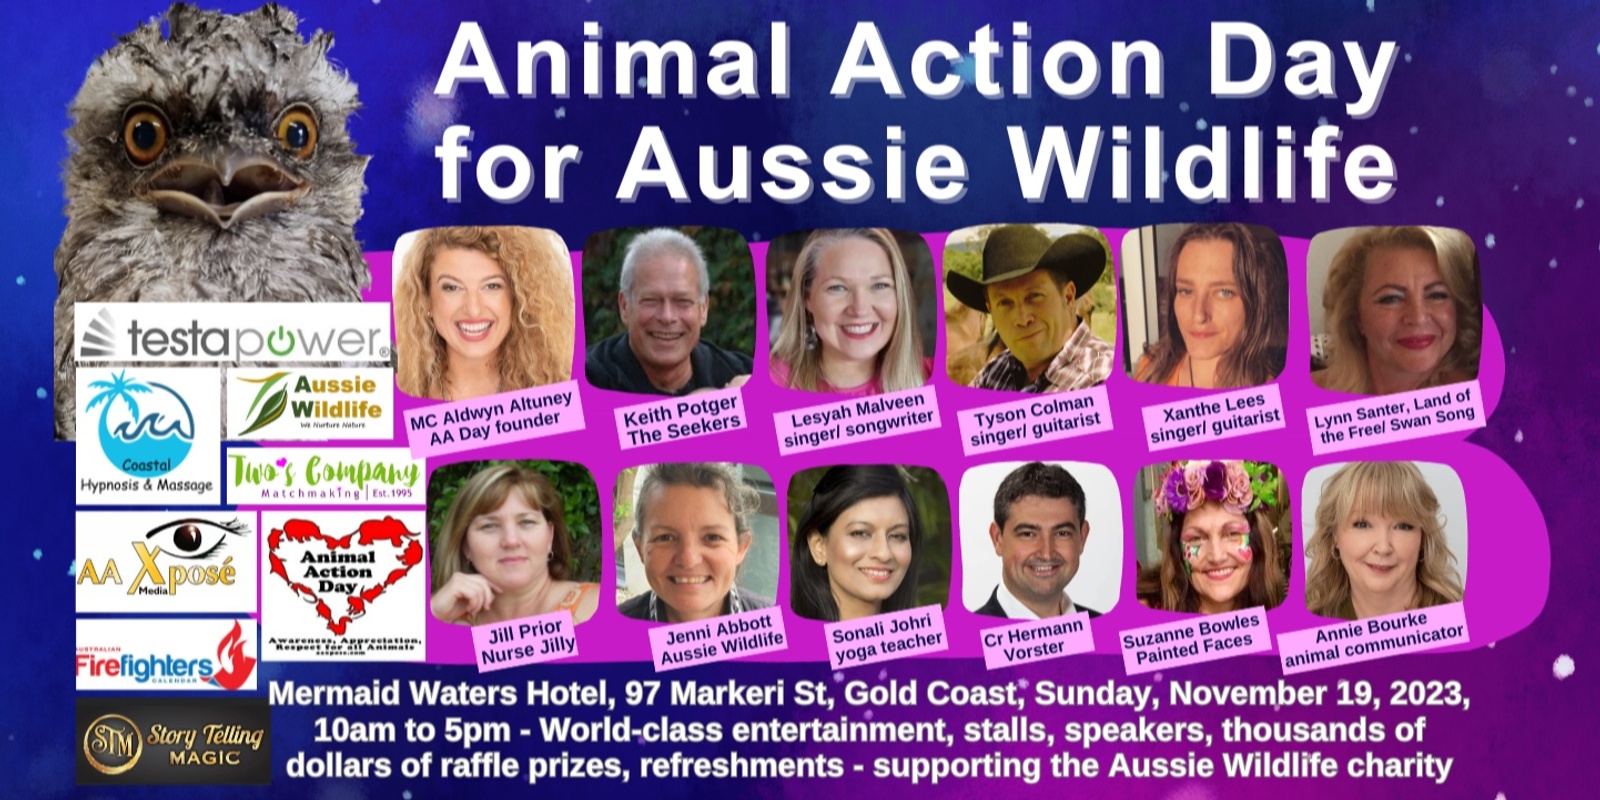 Banner image for Animal Action Day for Aussie Wildlife - Nov 19, 2023 - Mermaid Waters Hotel